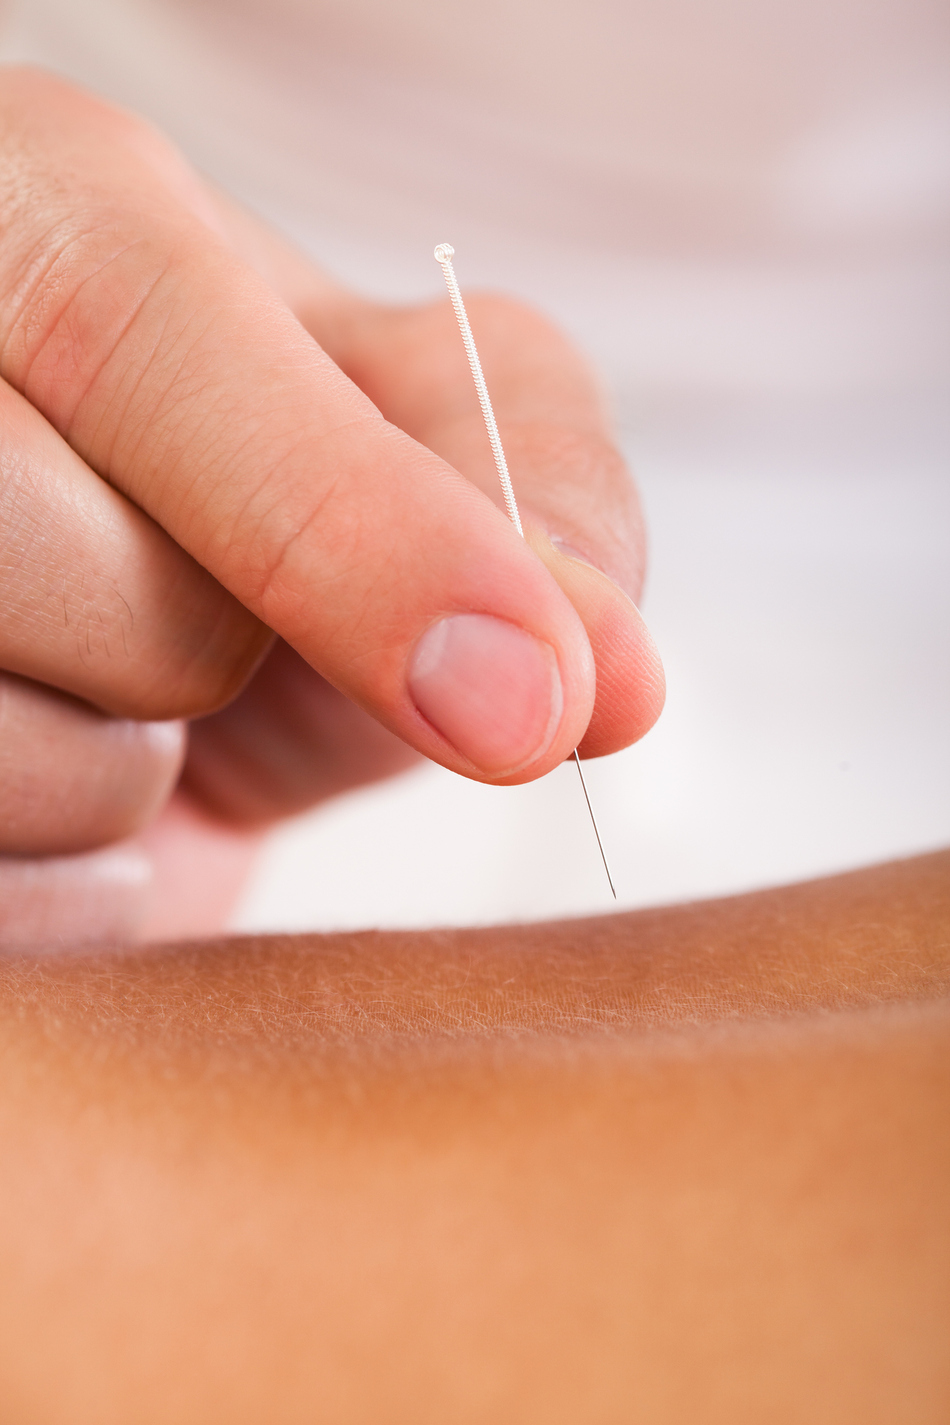 Menopause and Acupuncture